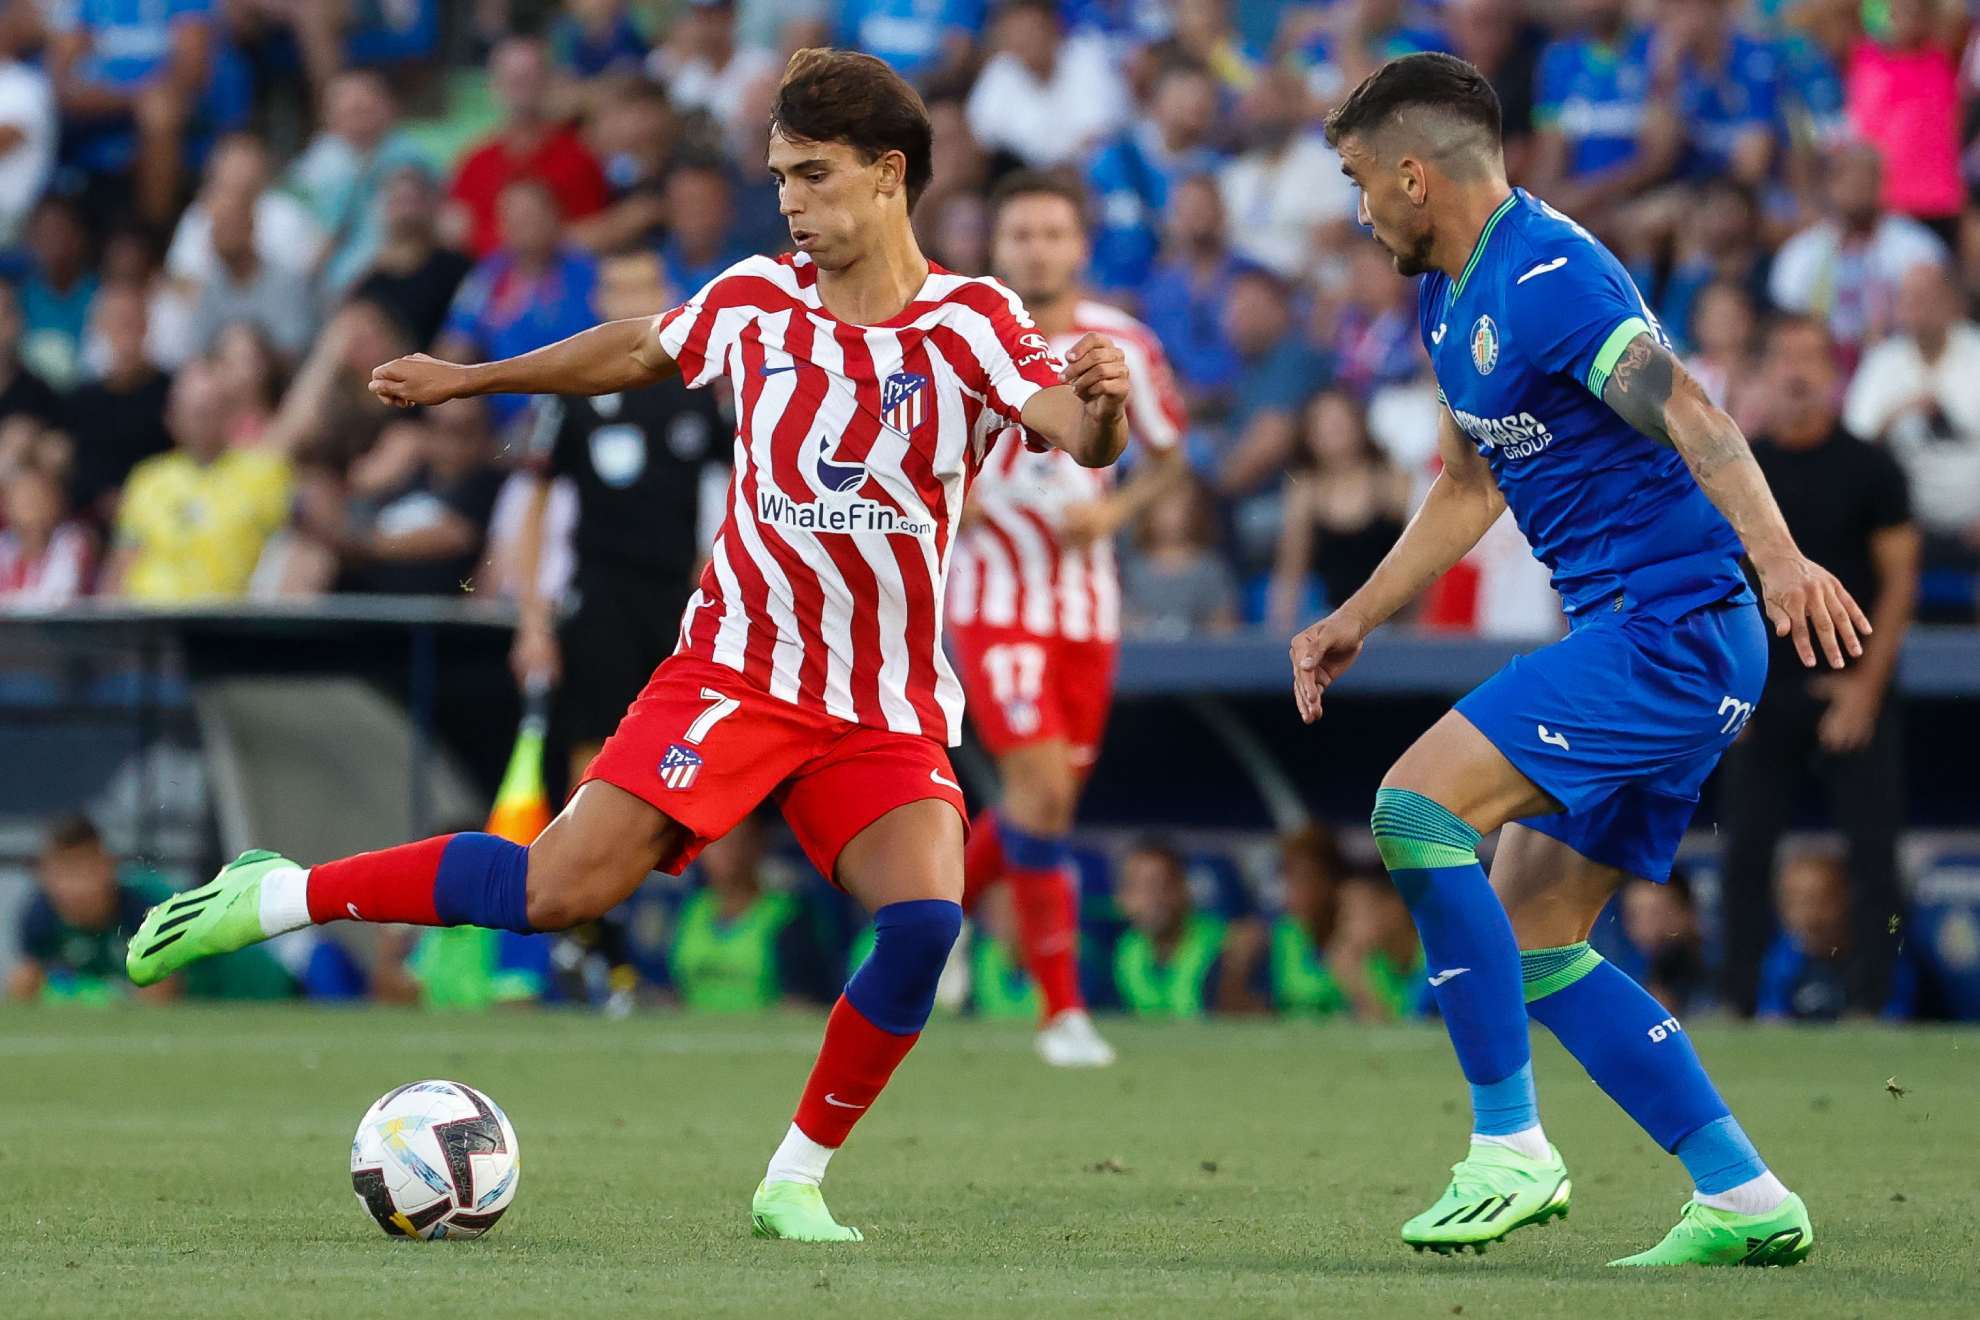 Joao Felix in the match with Getafe